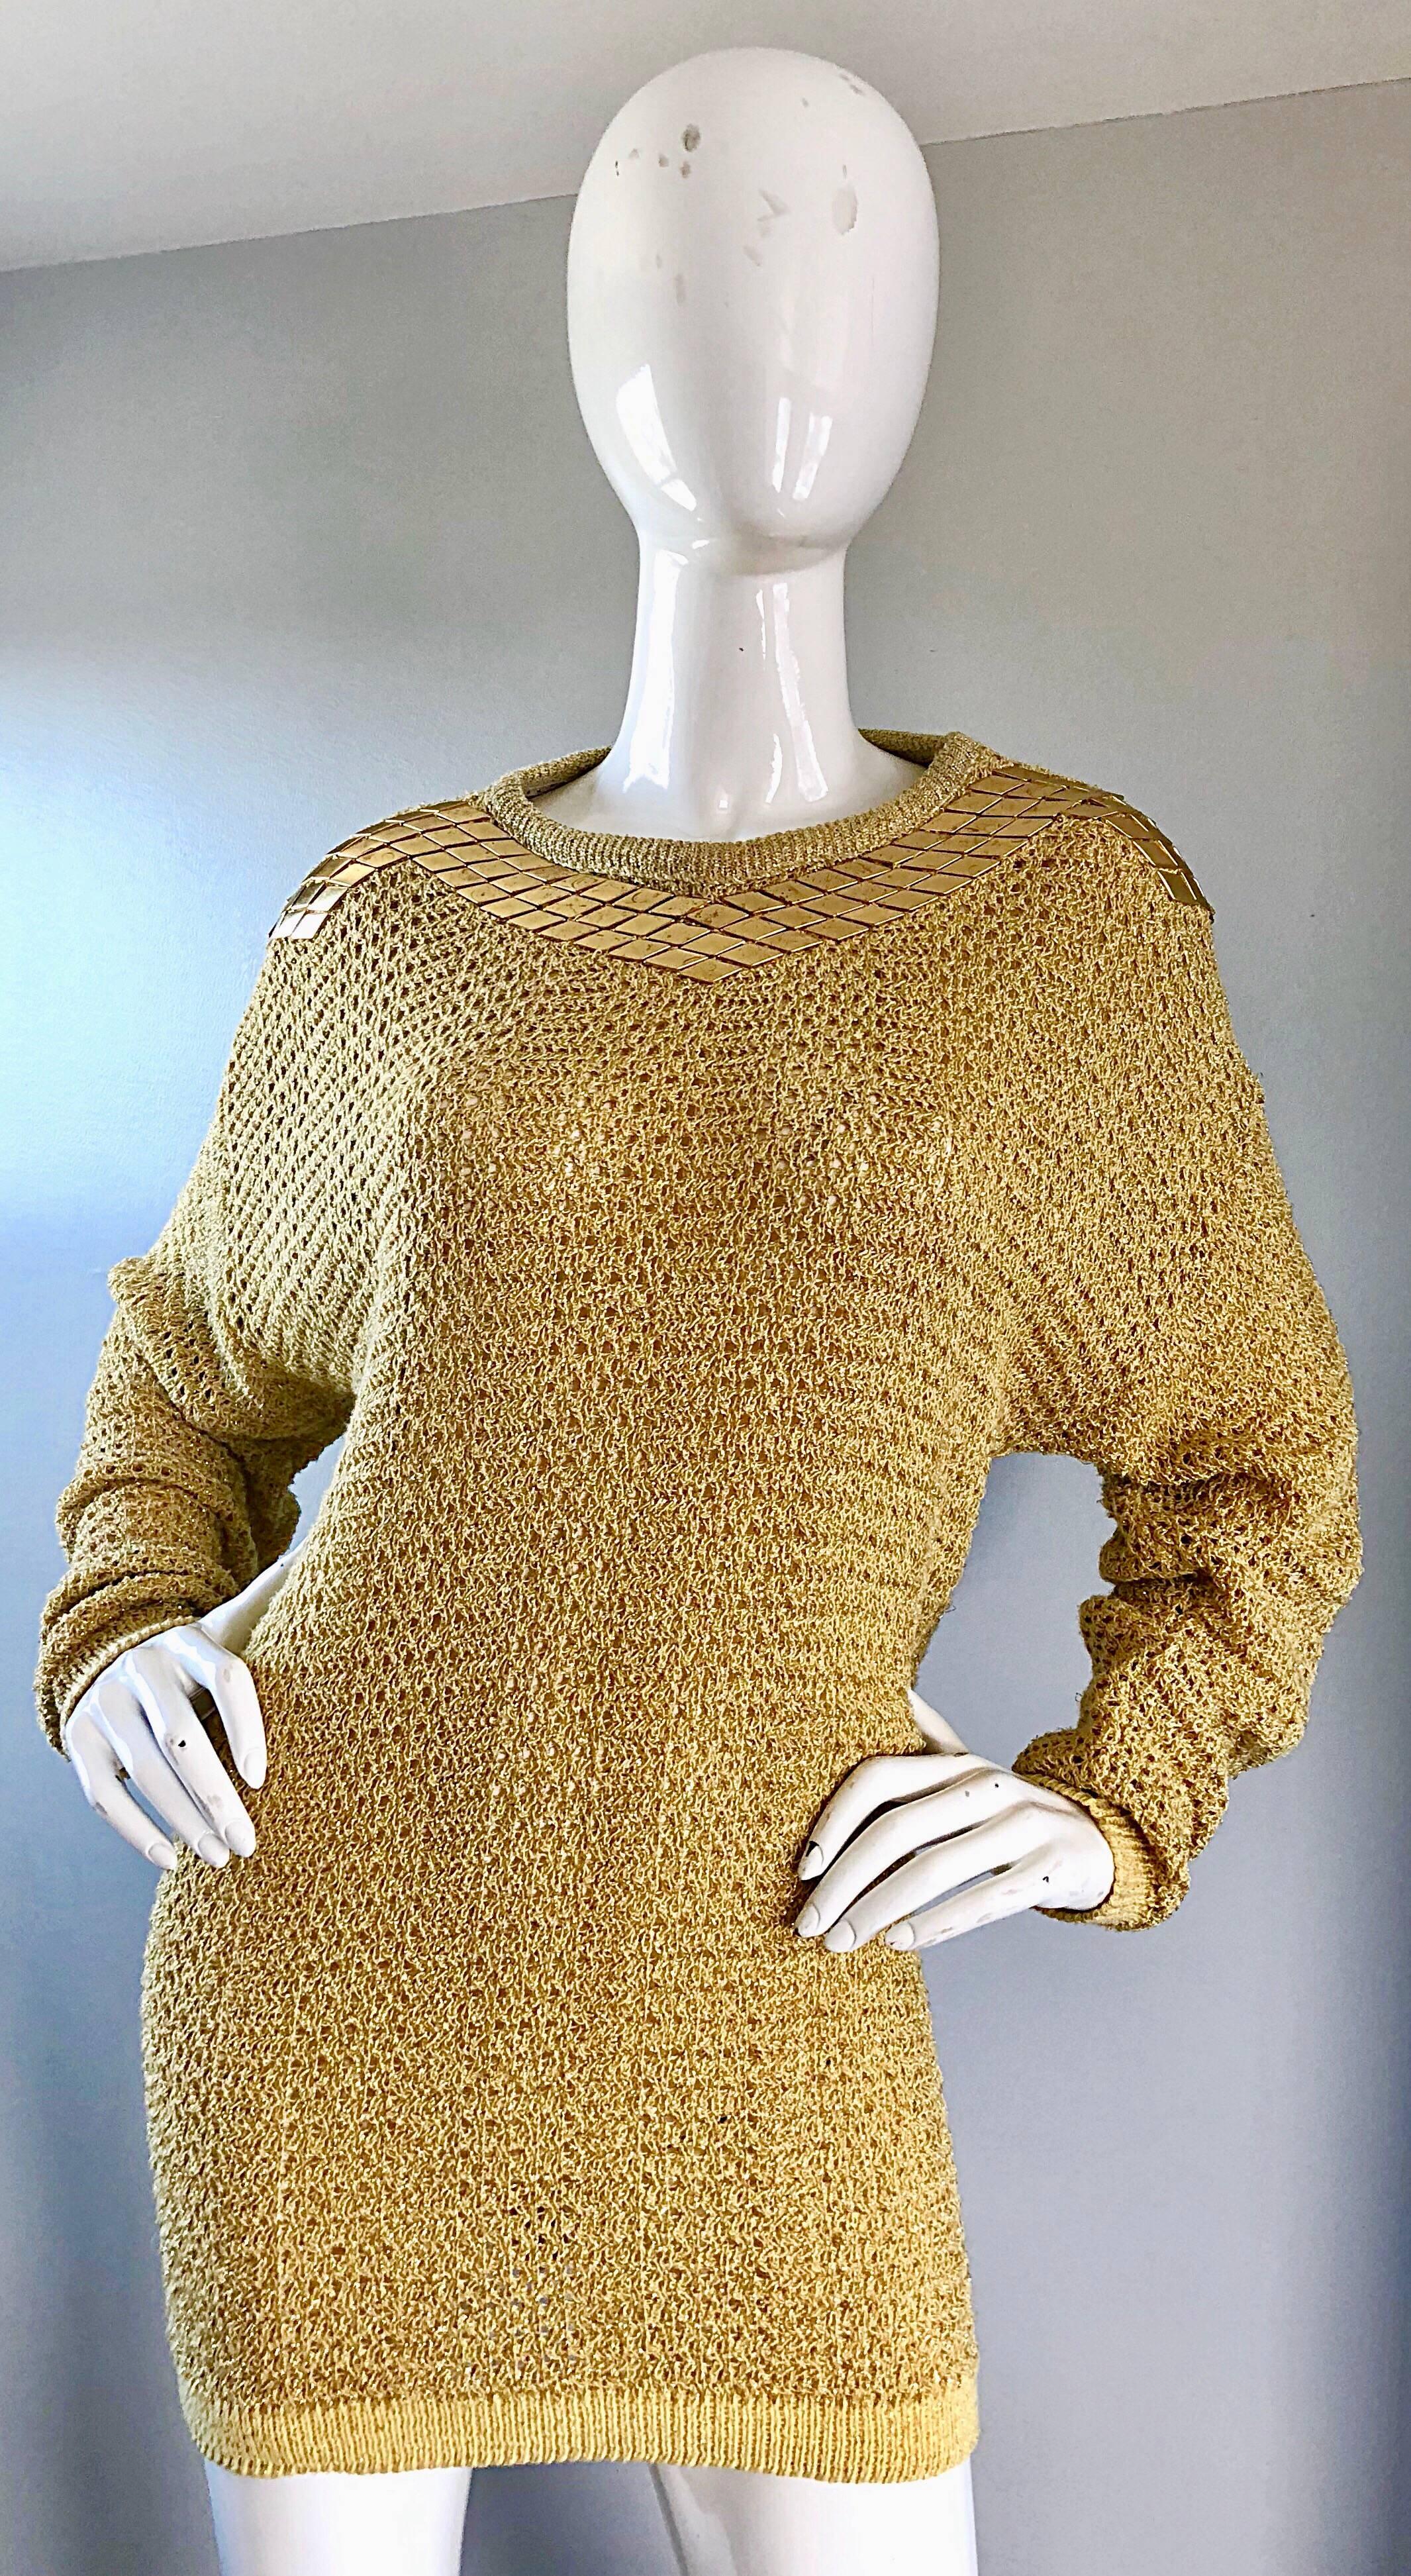 Chic 1980s MARSHALL ROUSSO of LAS VEGAS gold metallic slouchy oversized sweater top! Features a soft gold metallic open weave fabric, with gold metal flat studs on the front and back neckline. Flattering and forgiving dolman sleeves. Slouchy fit can